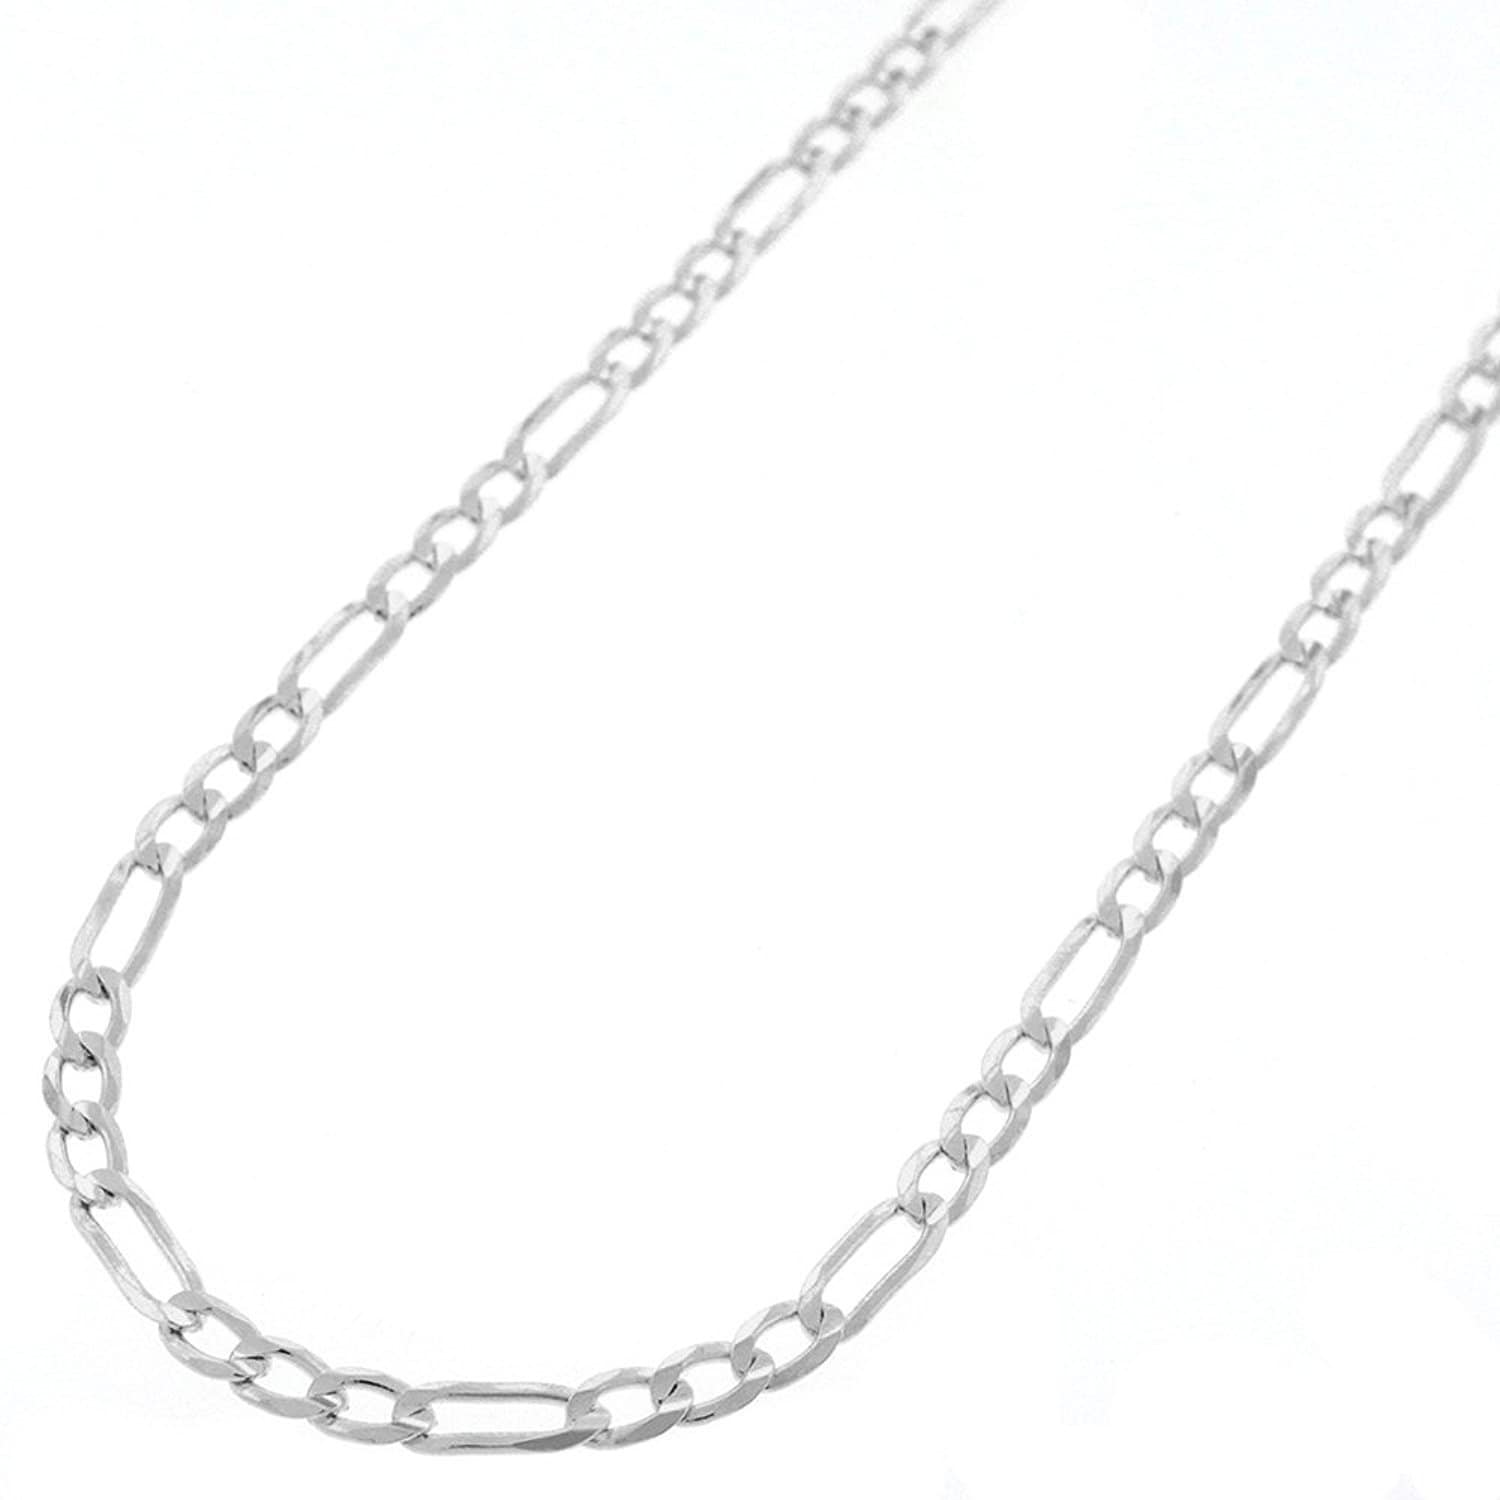 20,22" Solid Silver Link Unisex Necklace chain 925 Sterling Silver jewelry 18